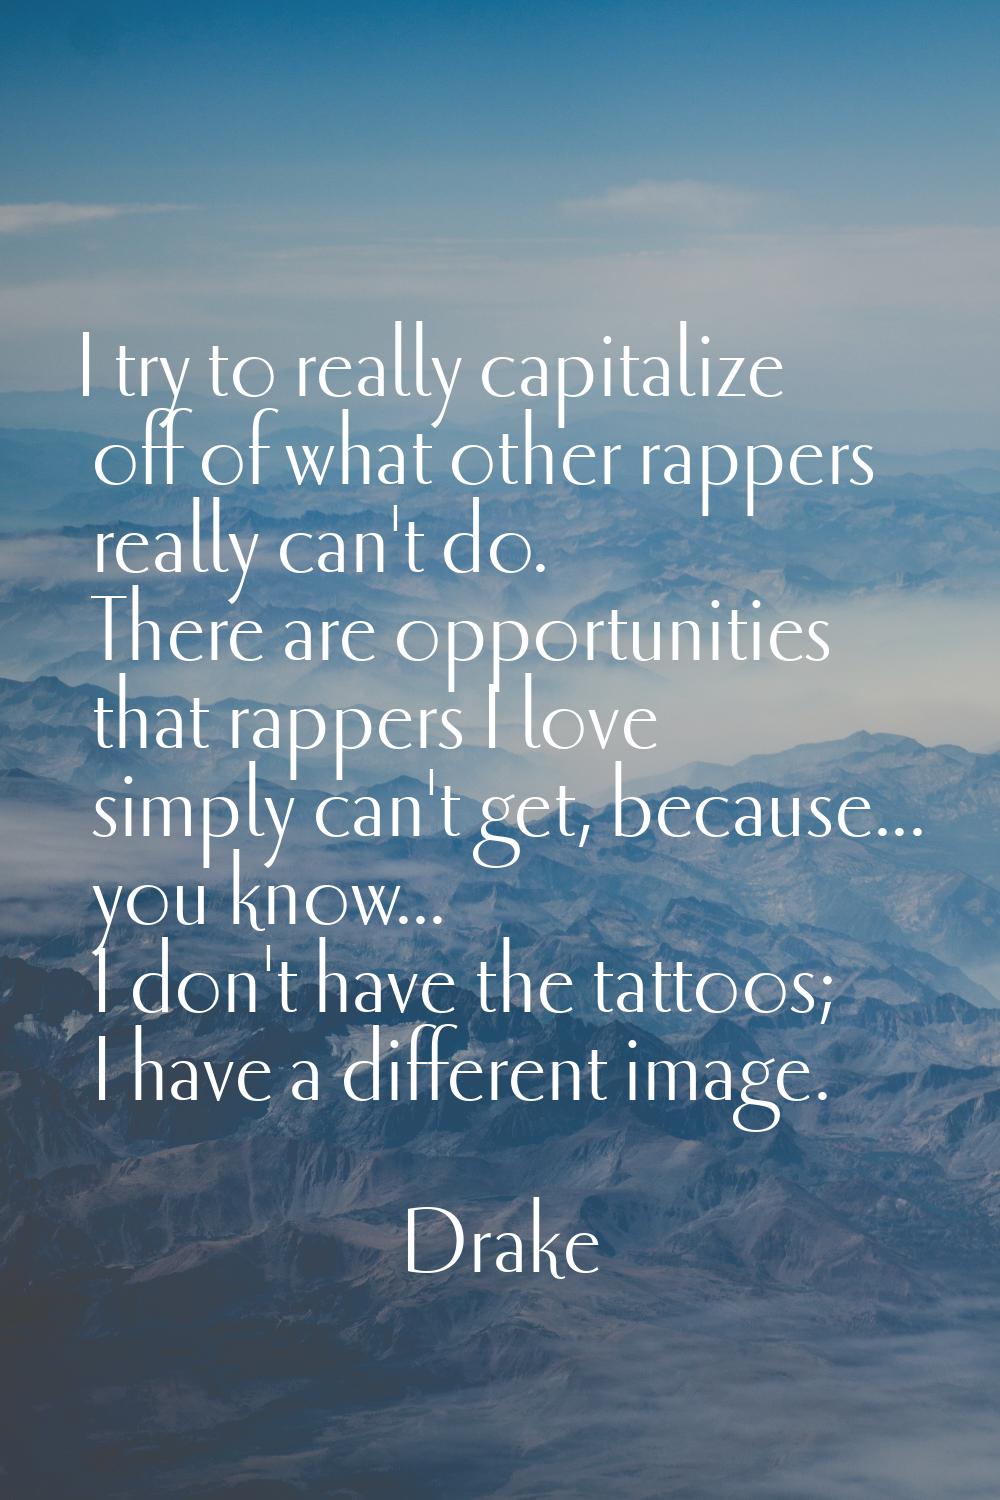 I try to really capitalize off of what other rappers really can't do. There are opportunities that 